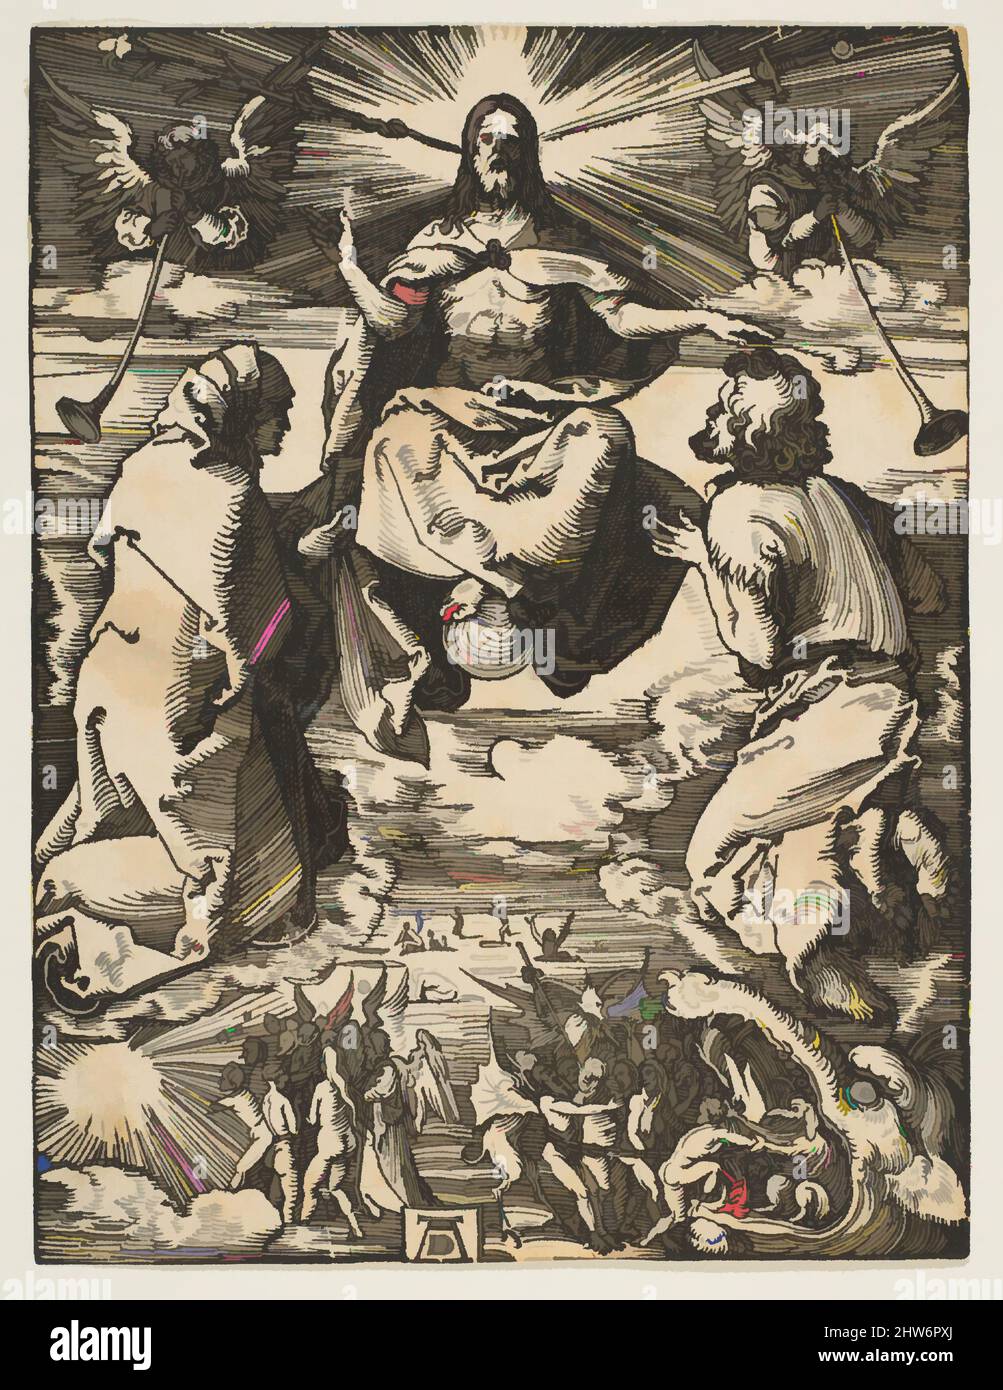 Art inspired by The Last Judgment, from The Small Passion, ca. 1510, Woodcut, sheet: 5 1/8 x 38 3/16 in. (13 x 97 cm), Prints, Albrecht Dürer (German, Nuremberg 1471–1528 Nuremberg, Classic works modernized by Artotop with a splash of modernity. Shapes, color and value, eye-catching visual impact on art. Emotions through freedom of artworks in a contemporary way. A timeless message pursuing a wildly creative new direction. Artists turning to the digital medium and creating the Artotop NFT Stock Photo